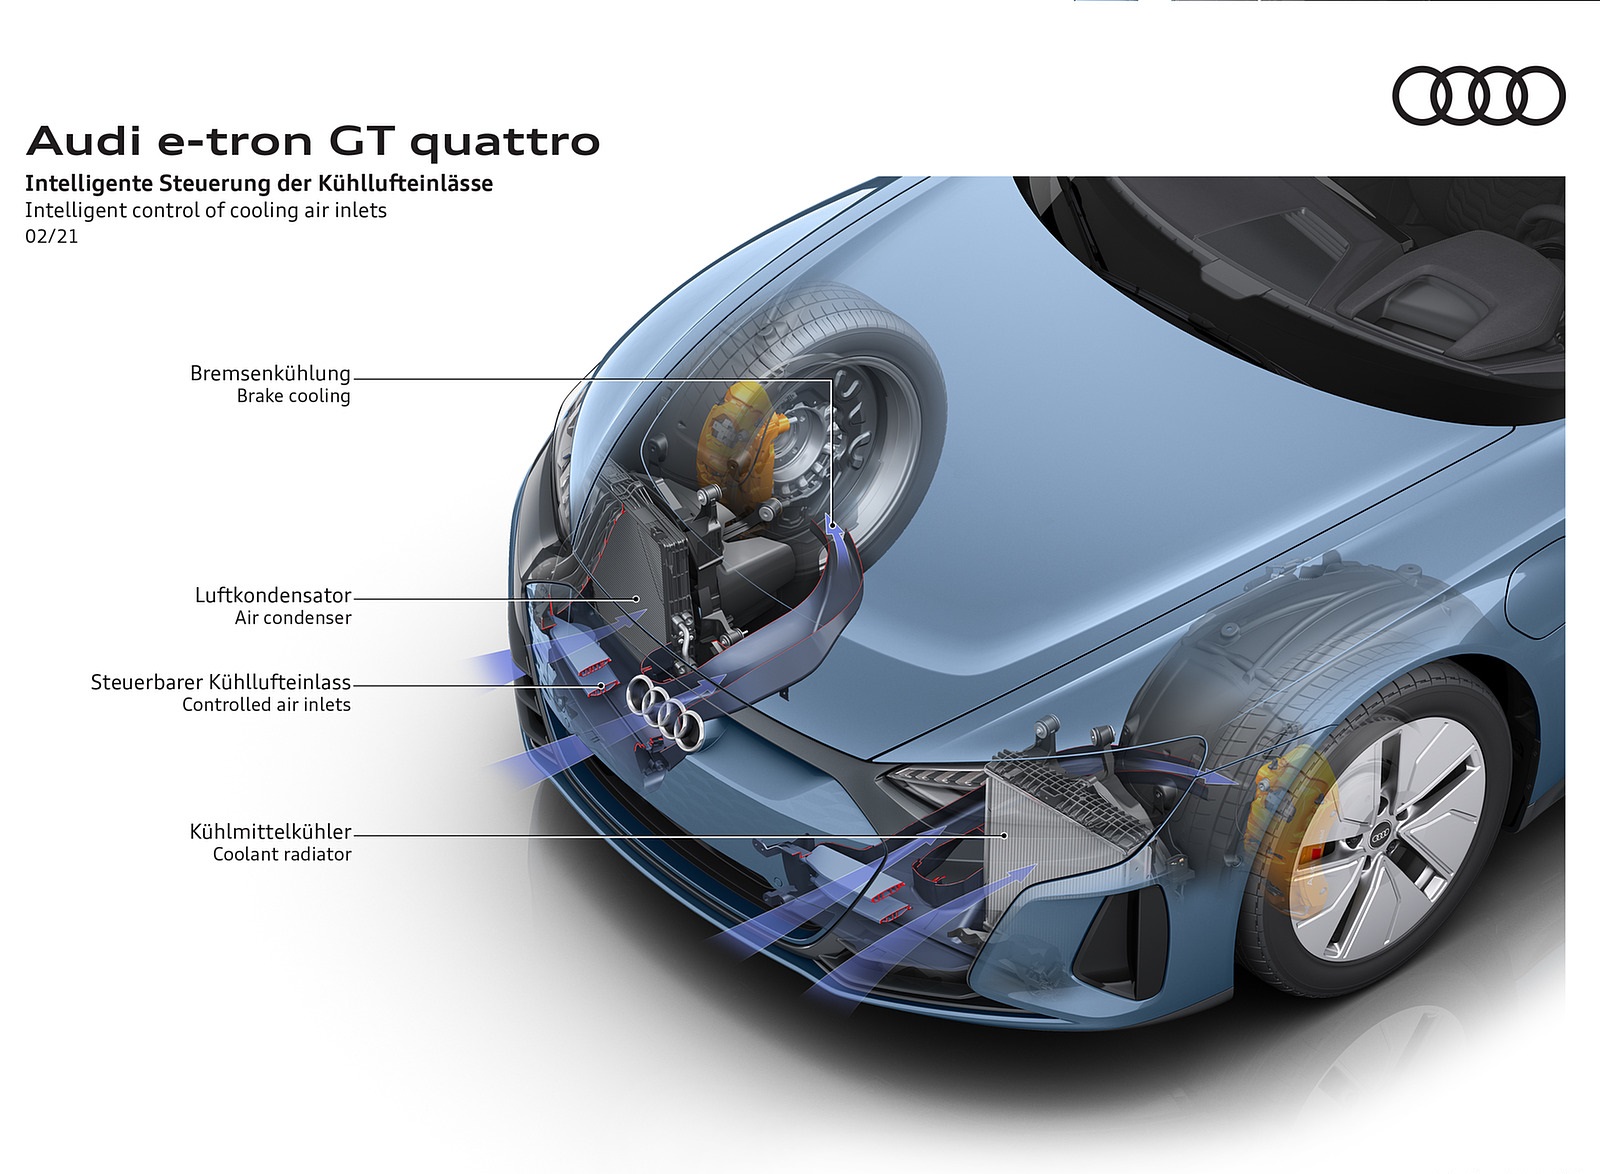 2022 Audi e-tron GT quattro Intelligent control of cooling air inlets Wallpapers #96 of 176